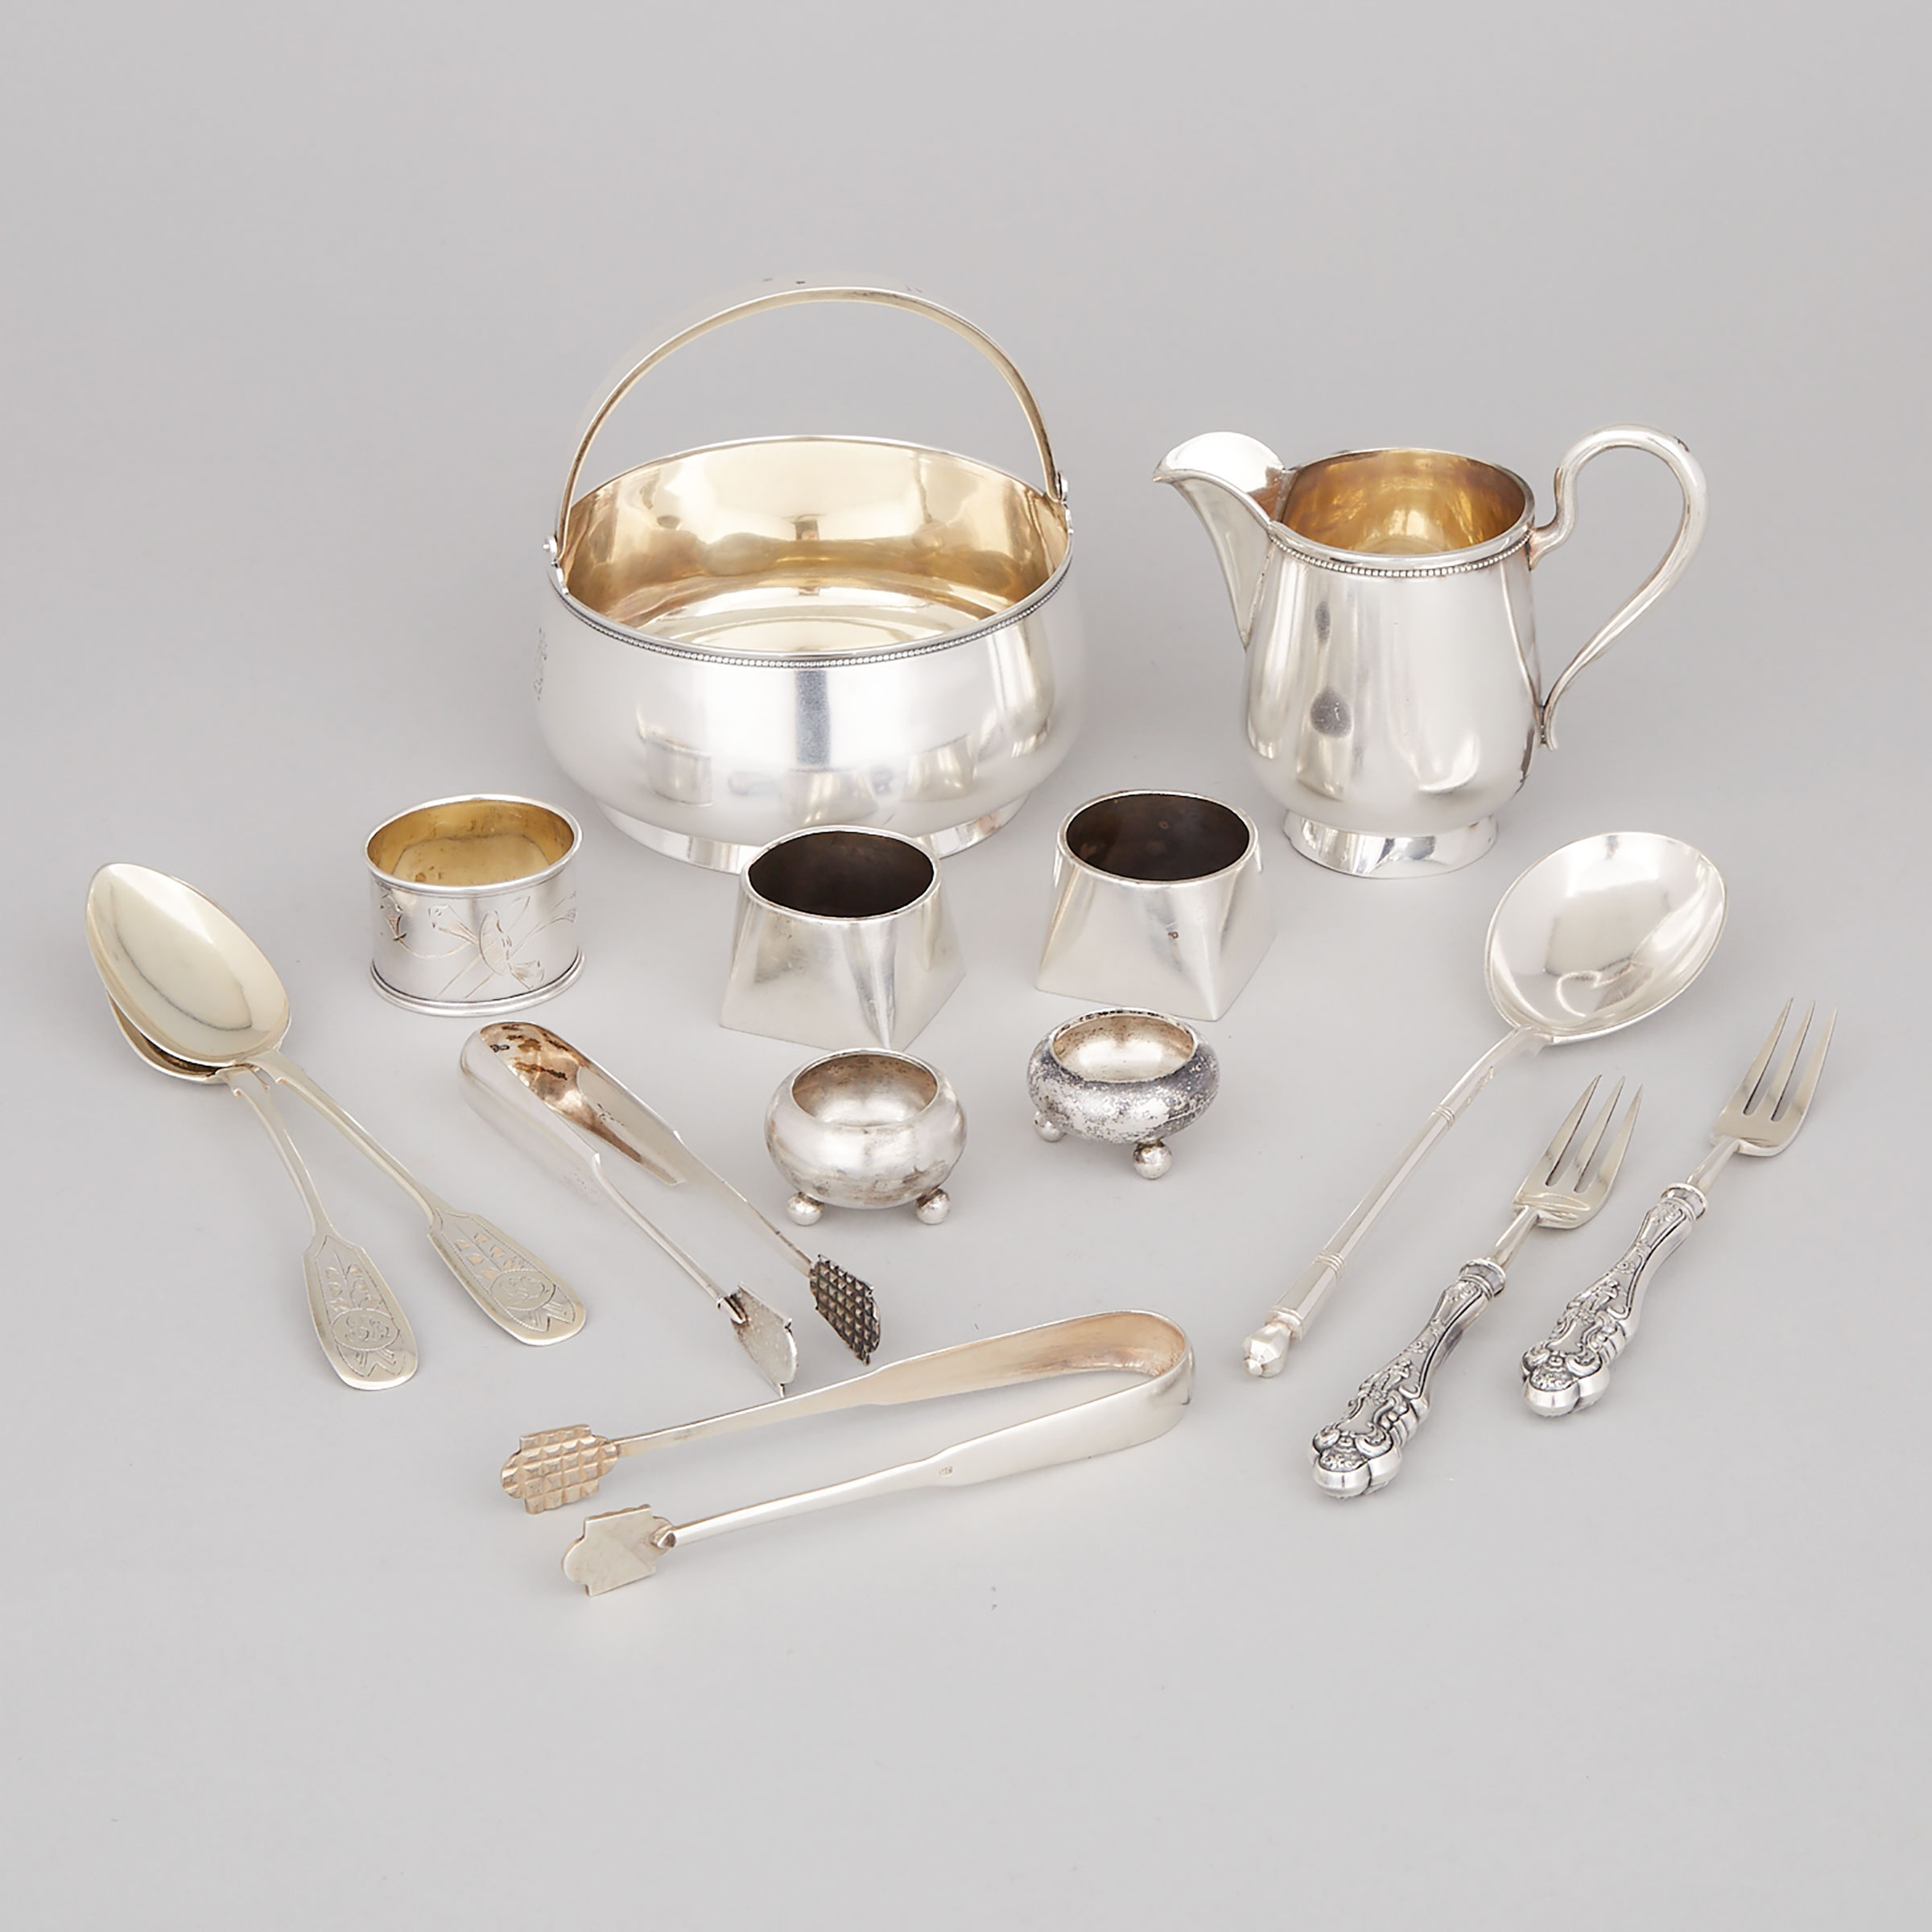 Group of Estonian and Russian Silver Articles, late 19th/early 20th century